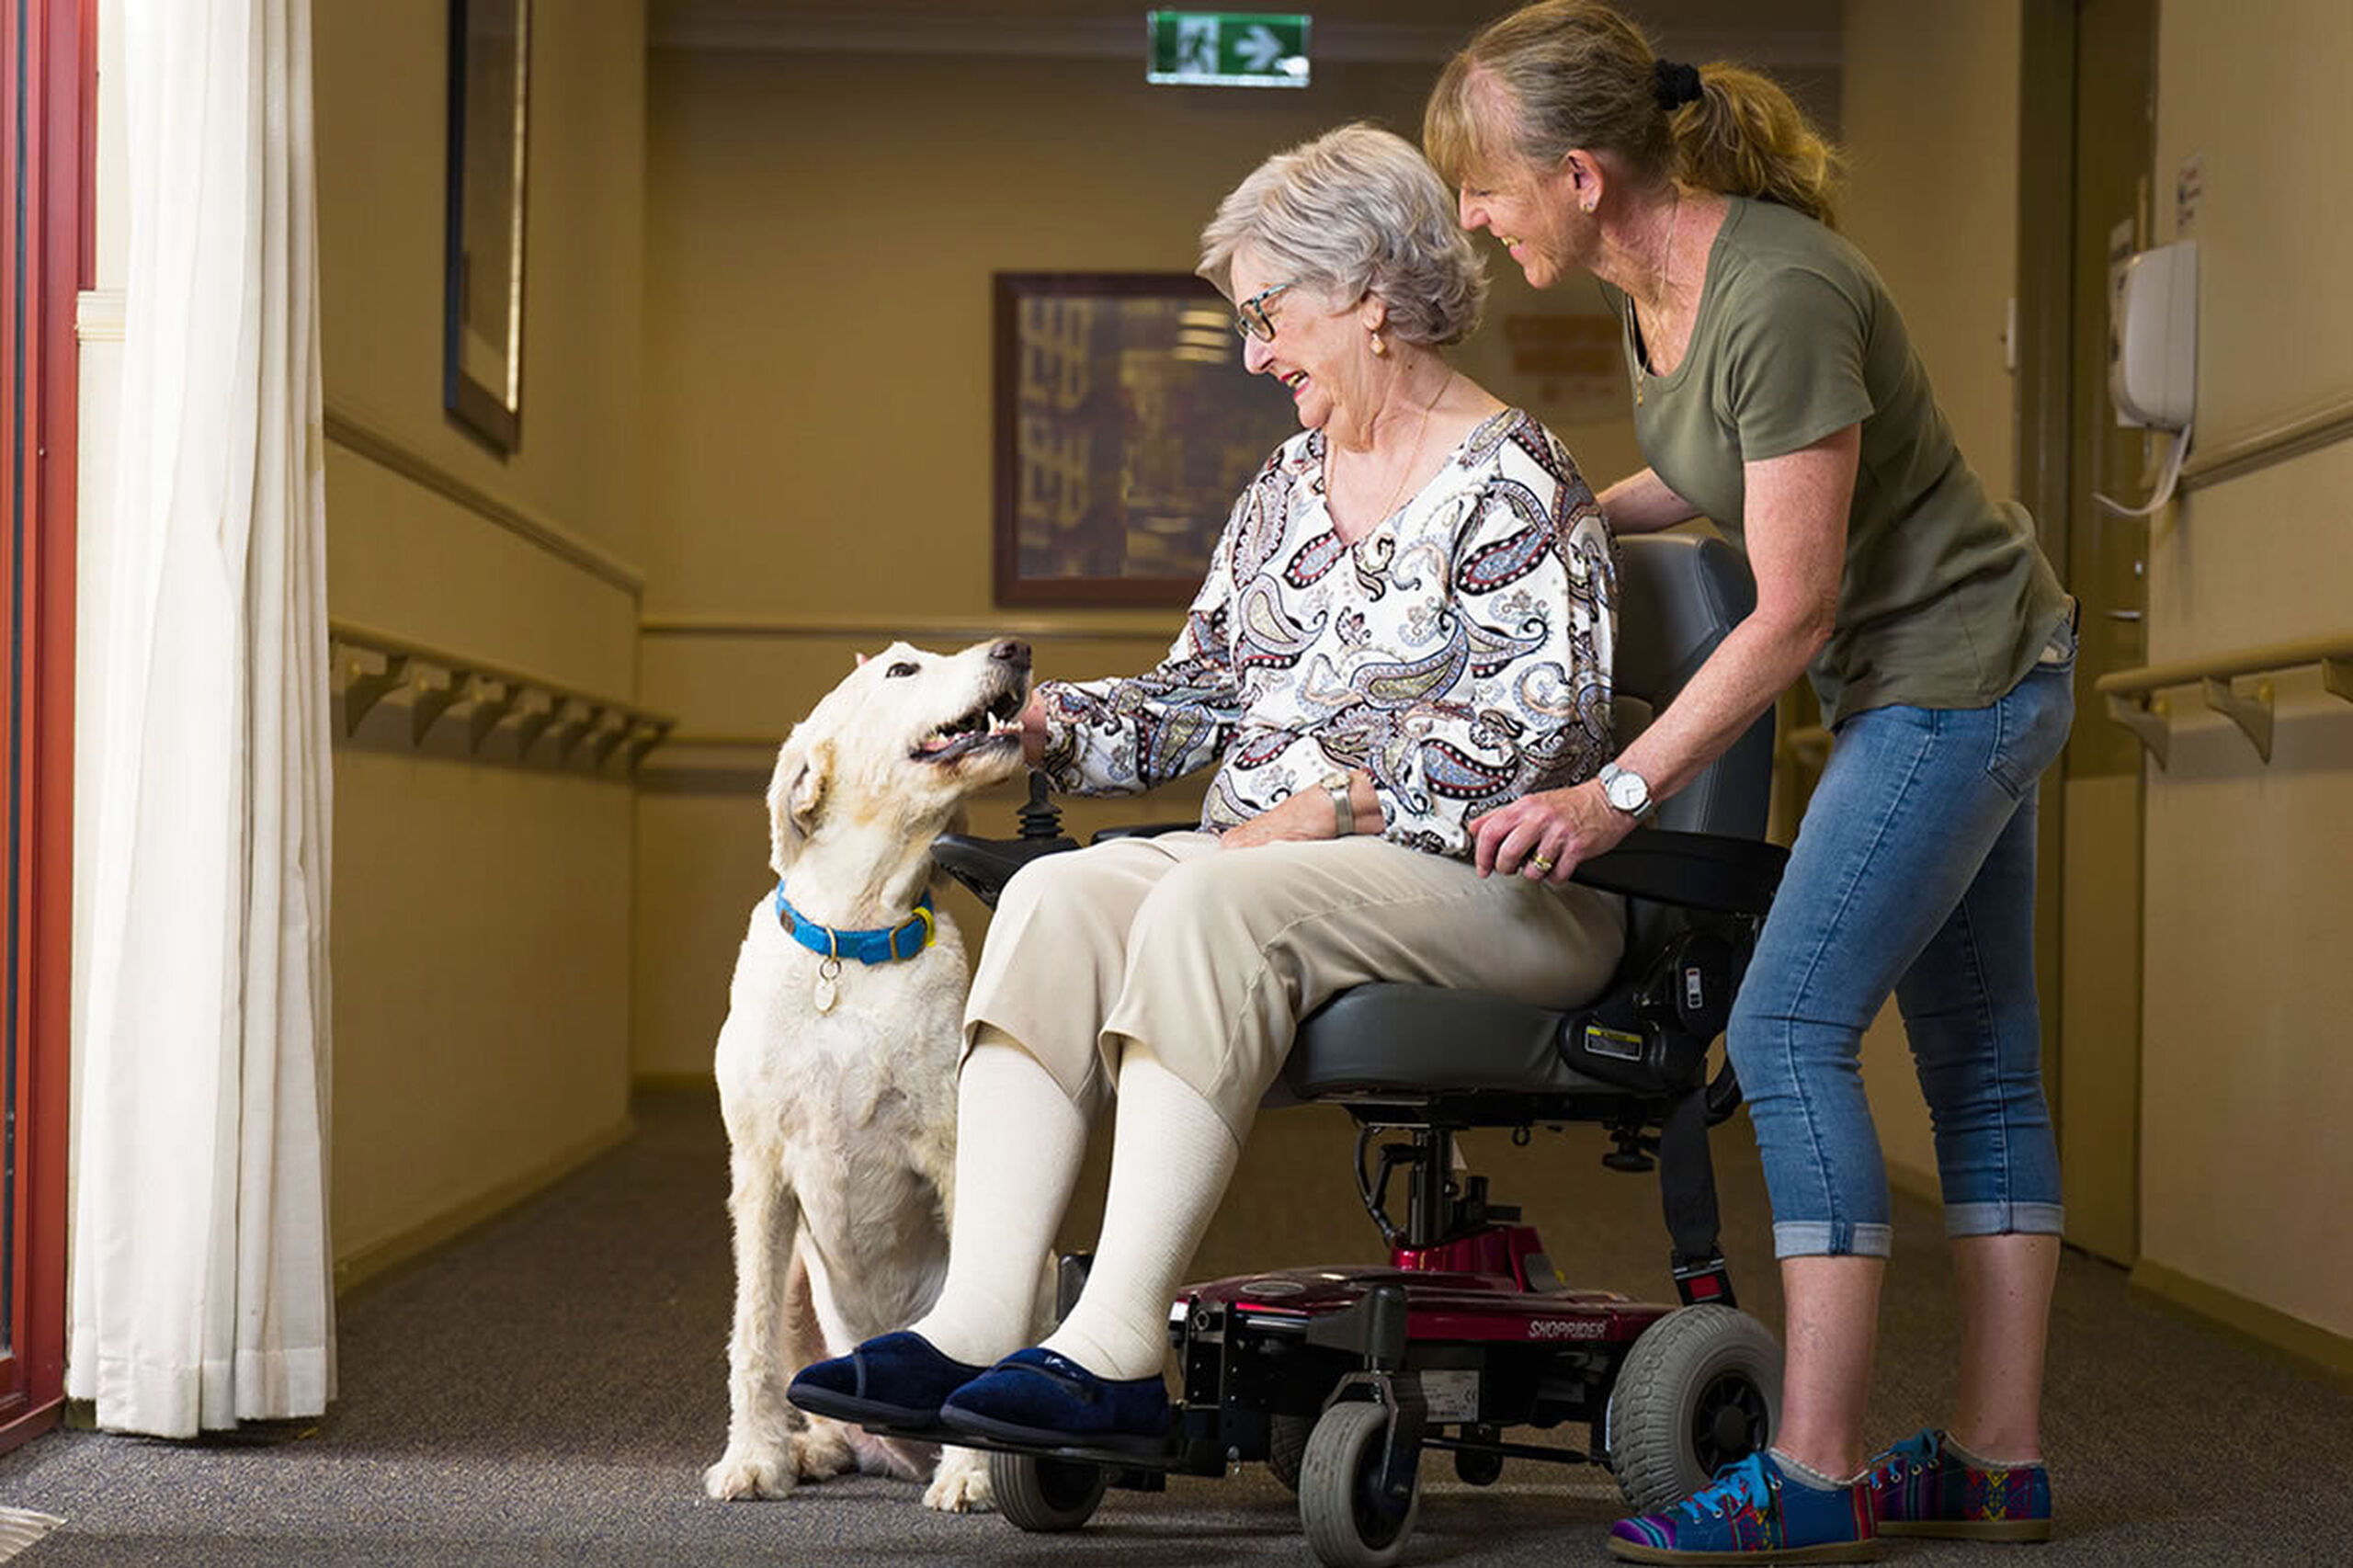 Puppy love at David Buttfield Centre Residential Aged Care in Gwelup